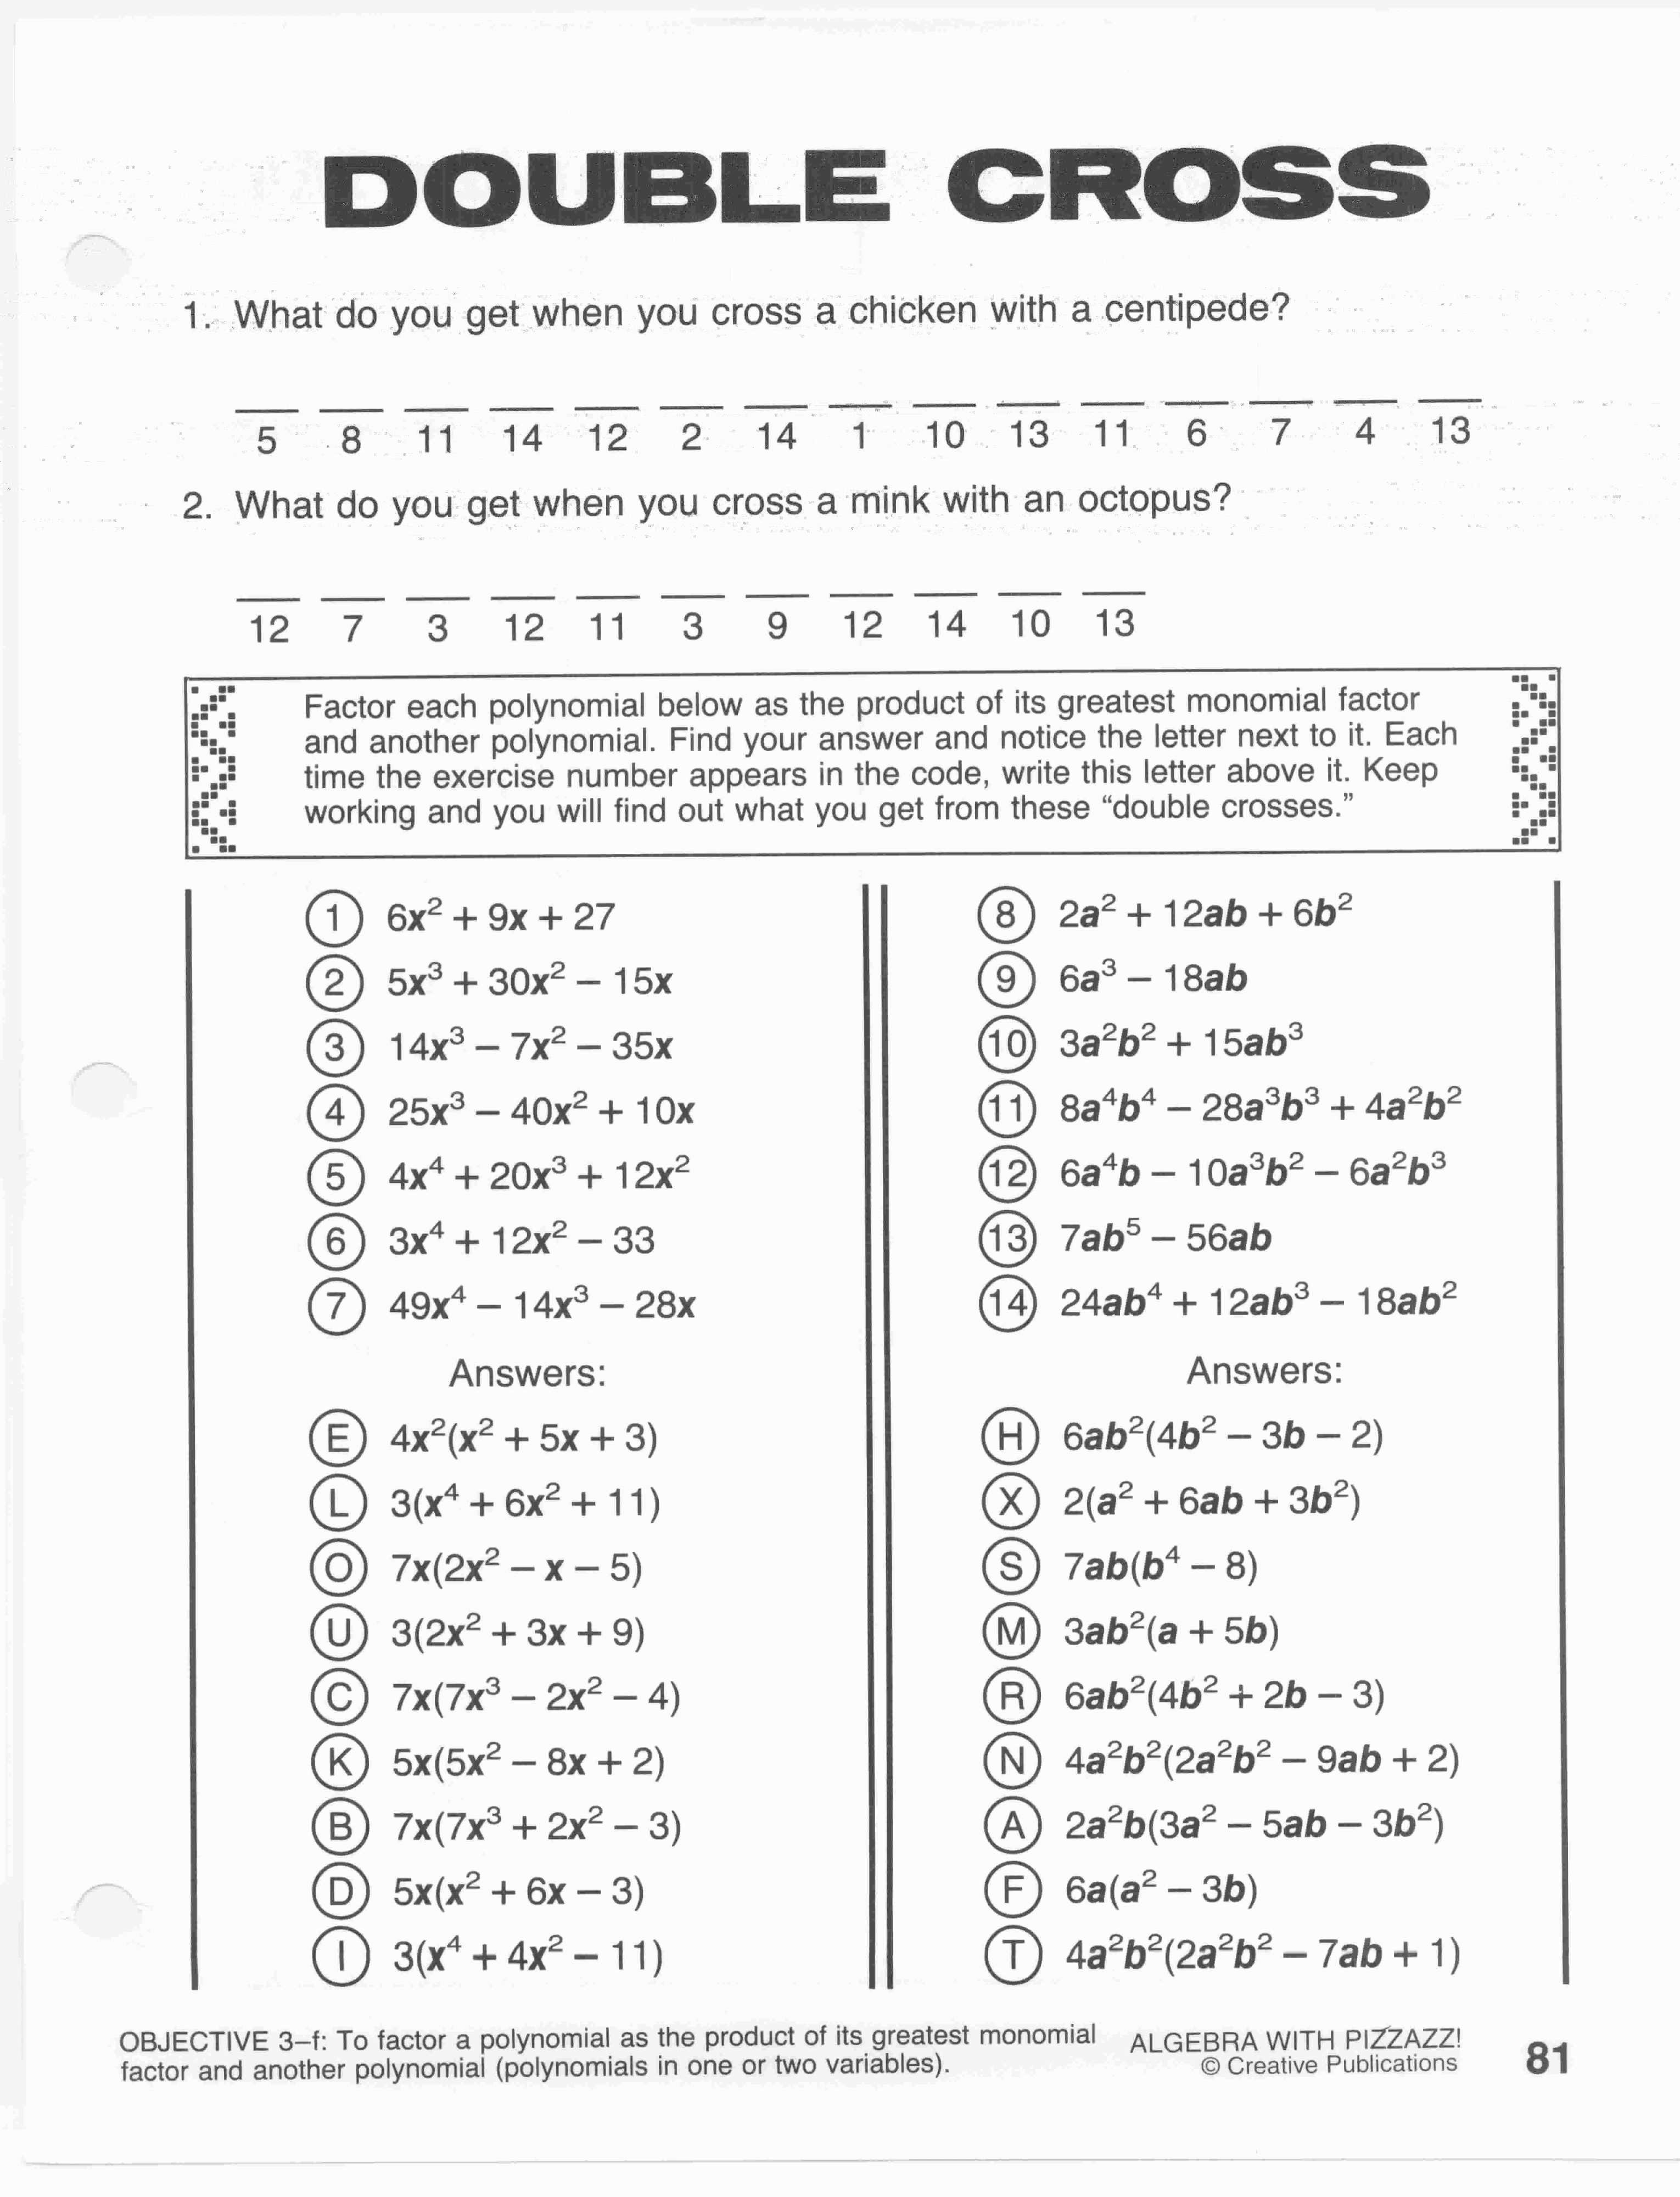 books-never-written-math-worksheet-answers-yours-forever-db-excel